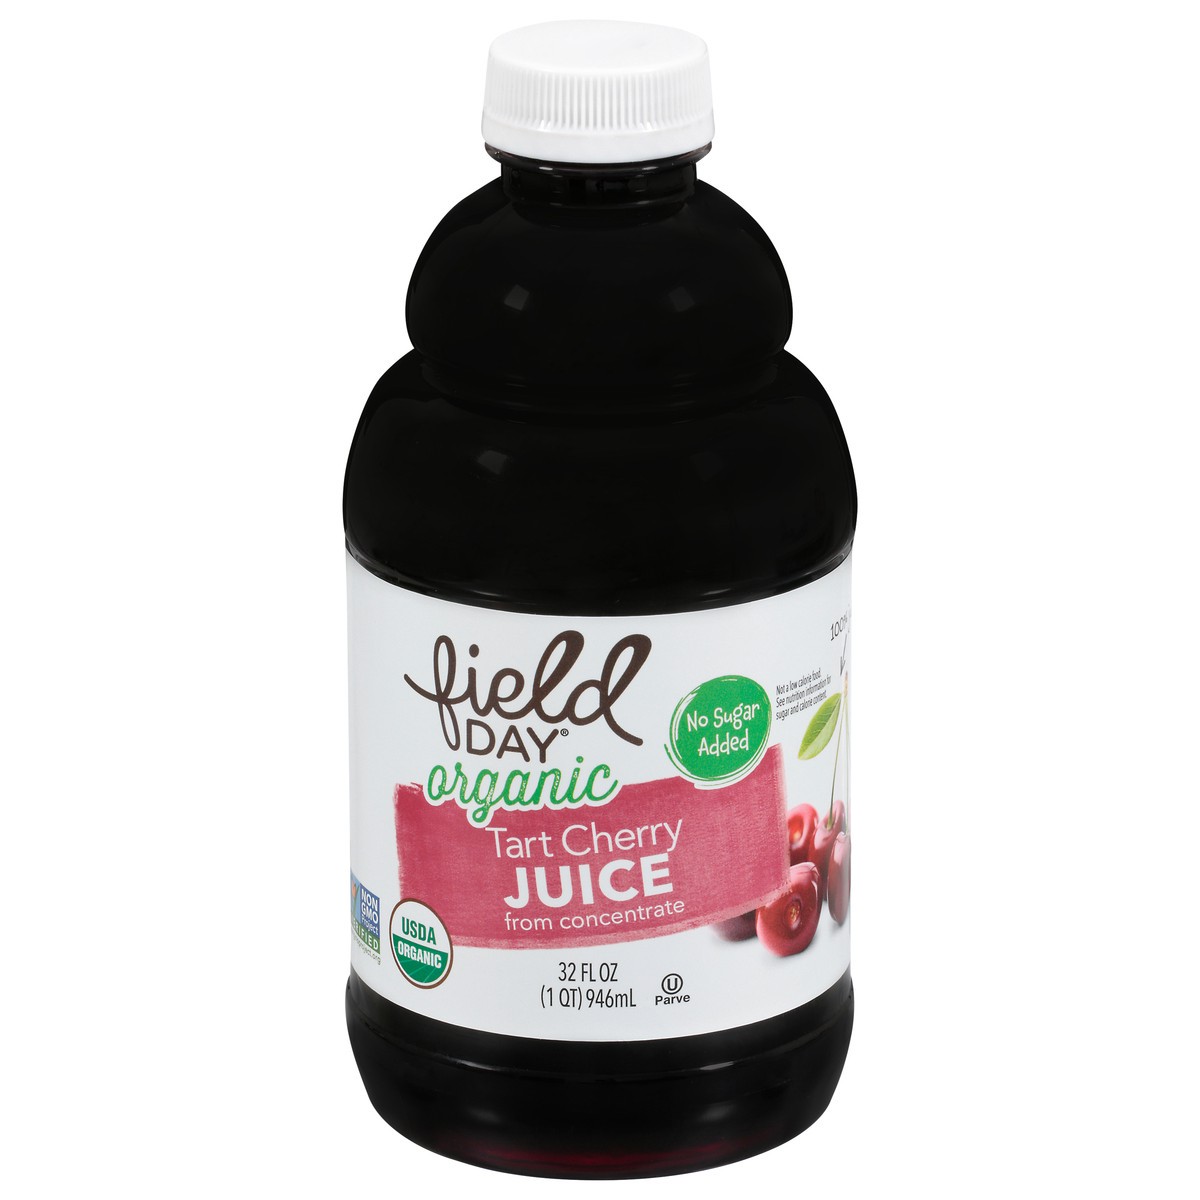 slide 1 of 13, Field Day Organic Tart Cherry Juice from Concentrate 32 fl oz, 32 oz